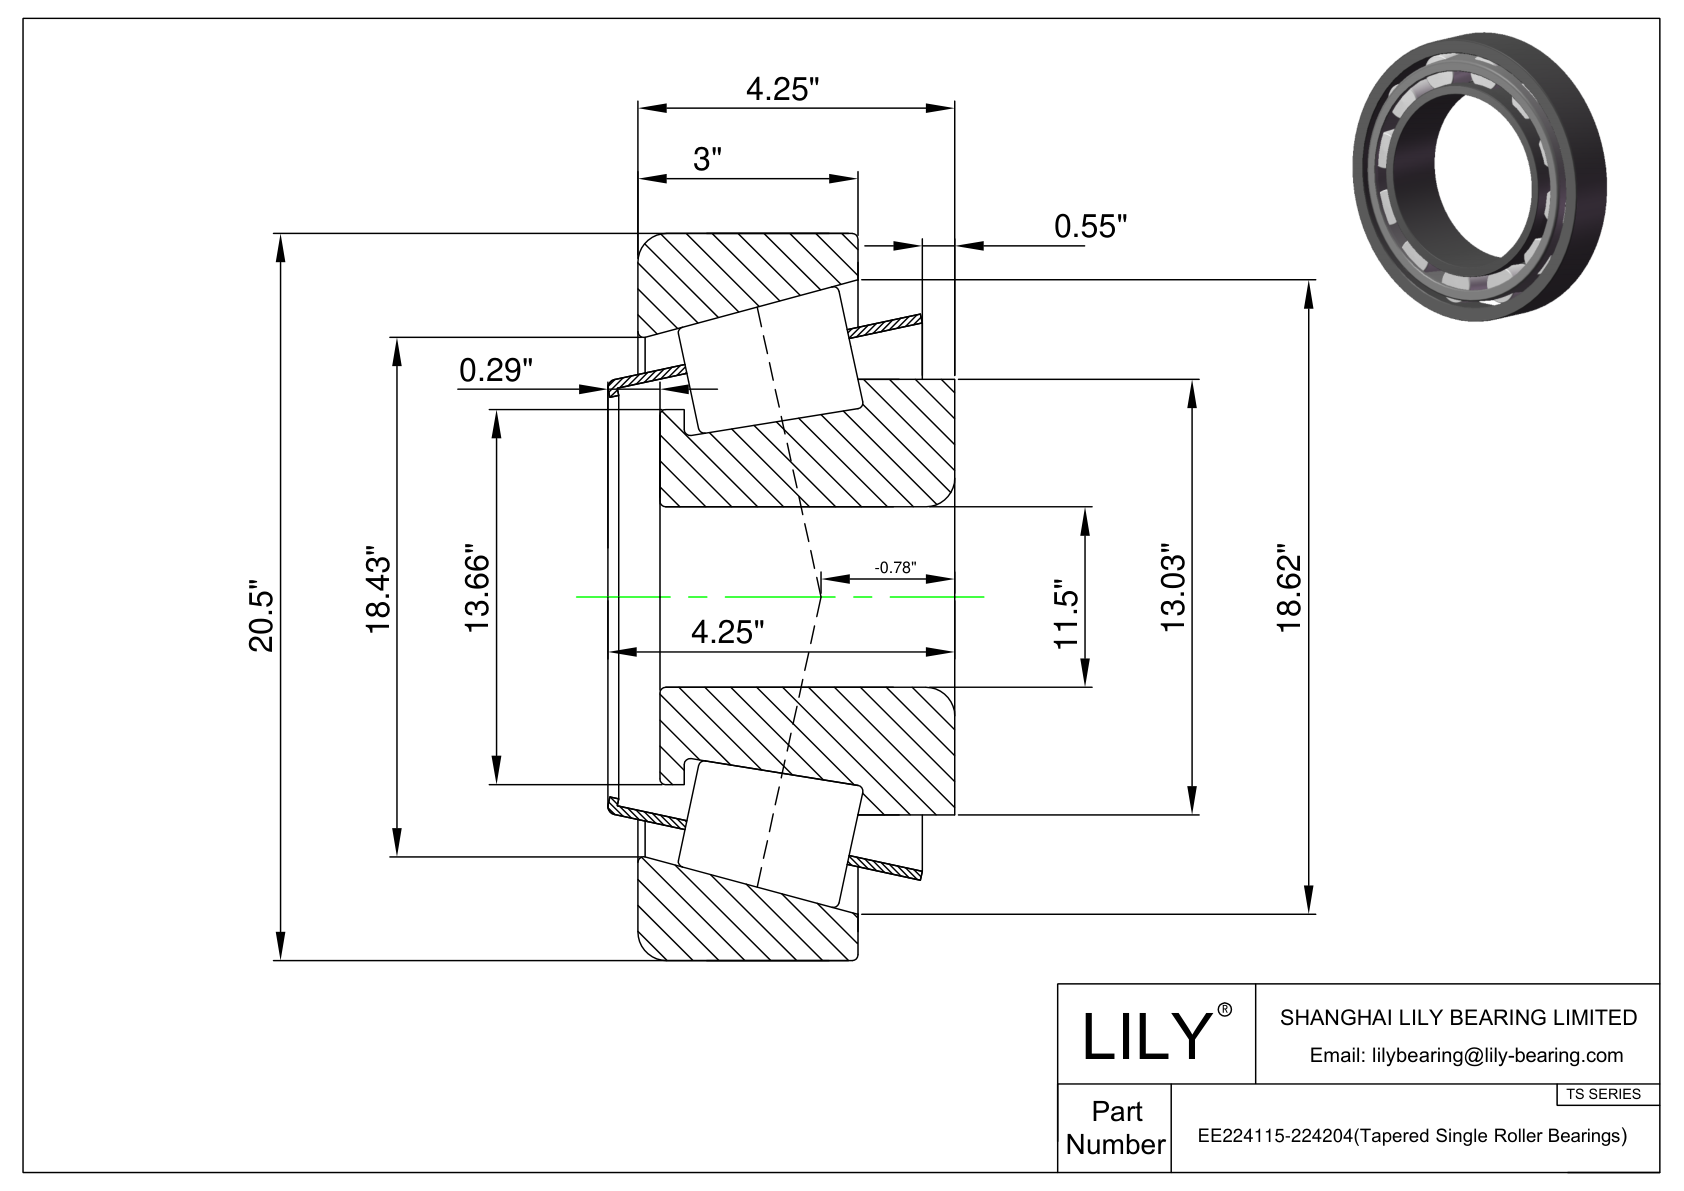 EE224115-224204 TS (Tapered Single Roller Bearings) (Imperial) cad drawing